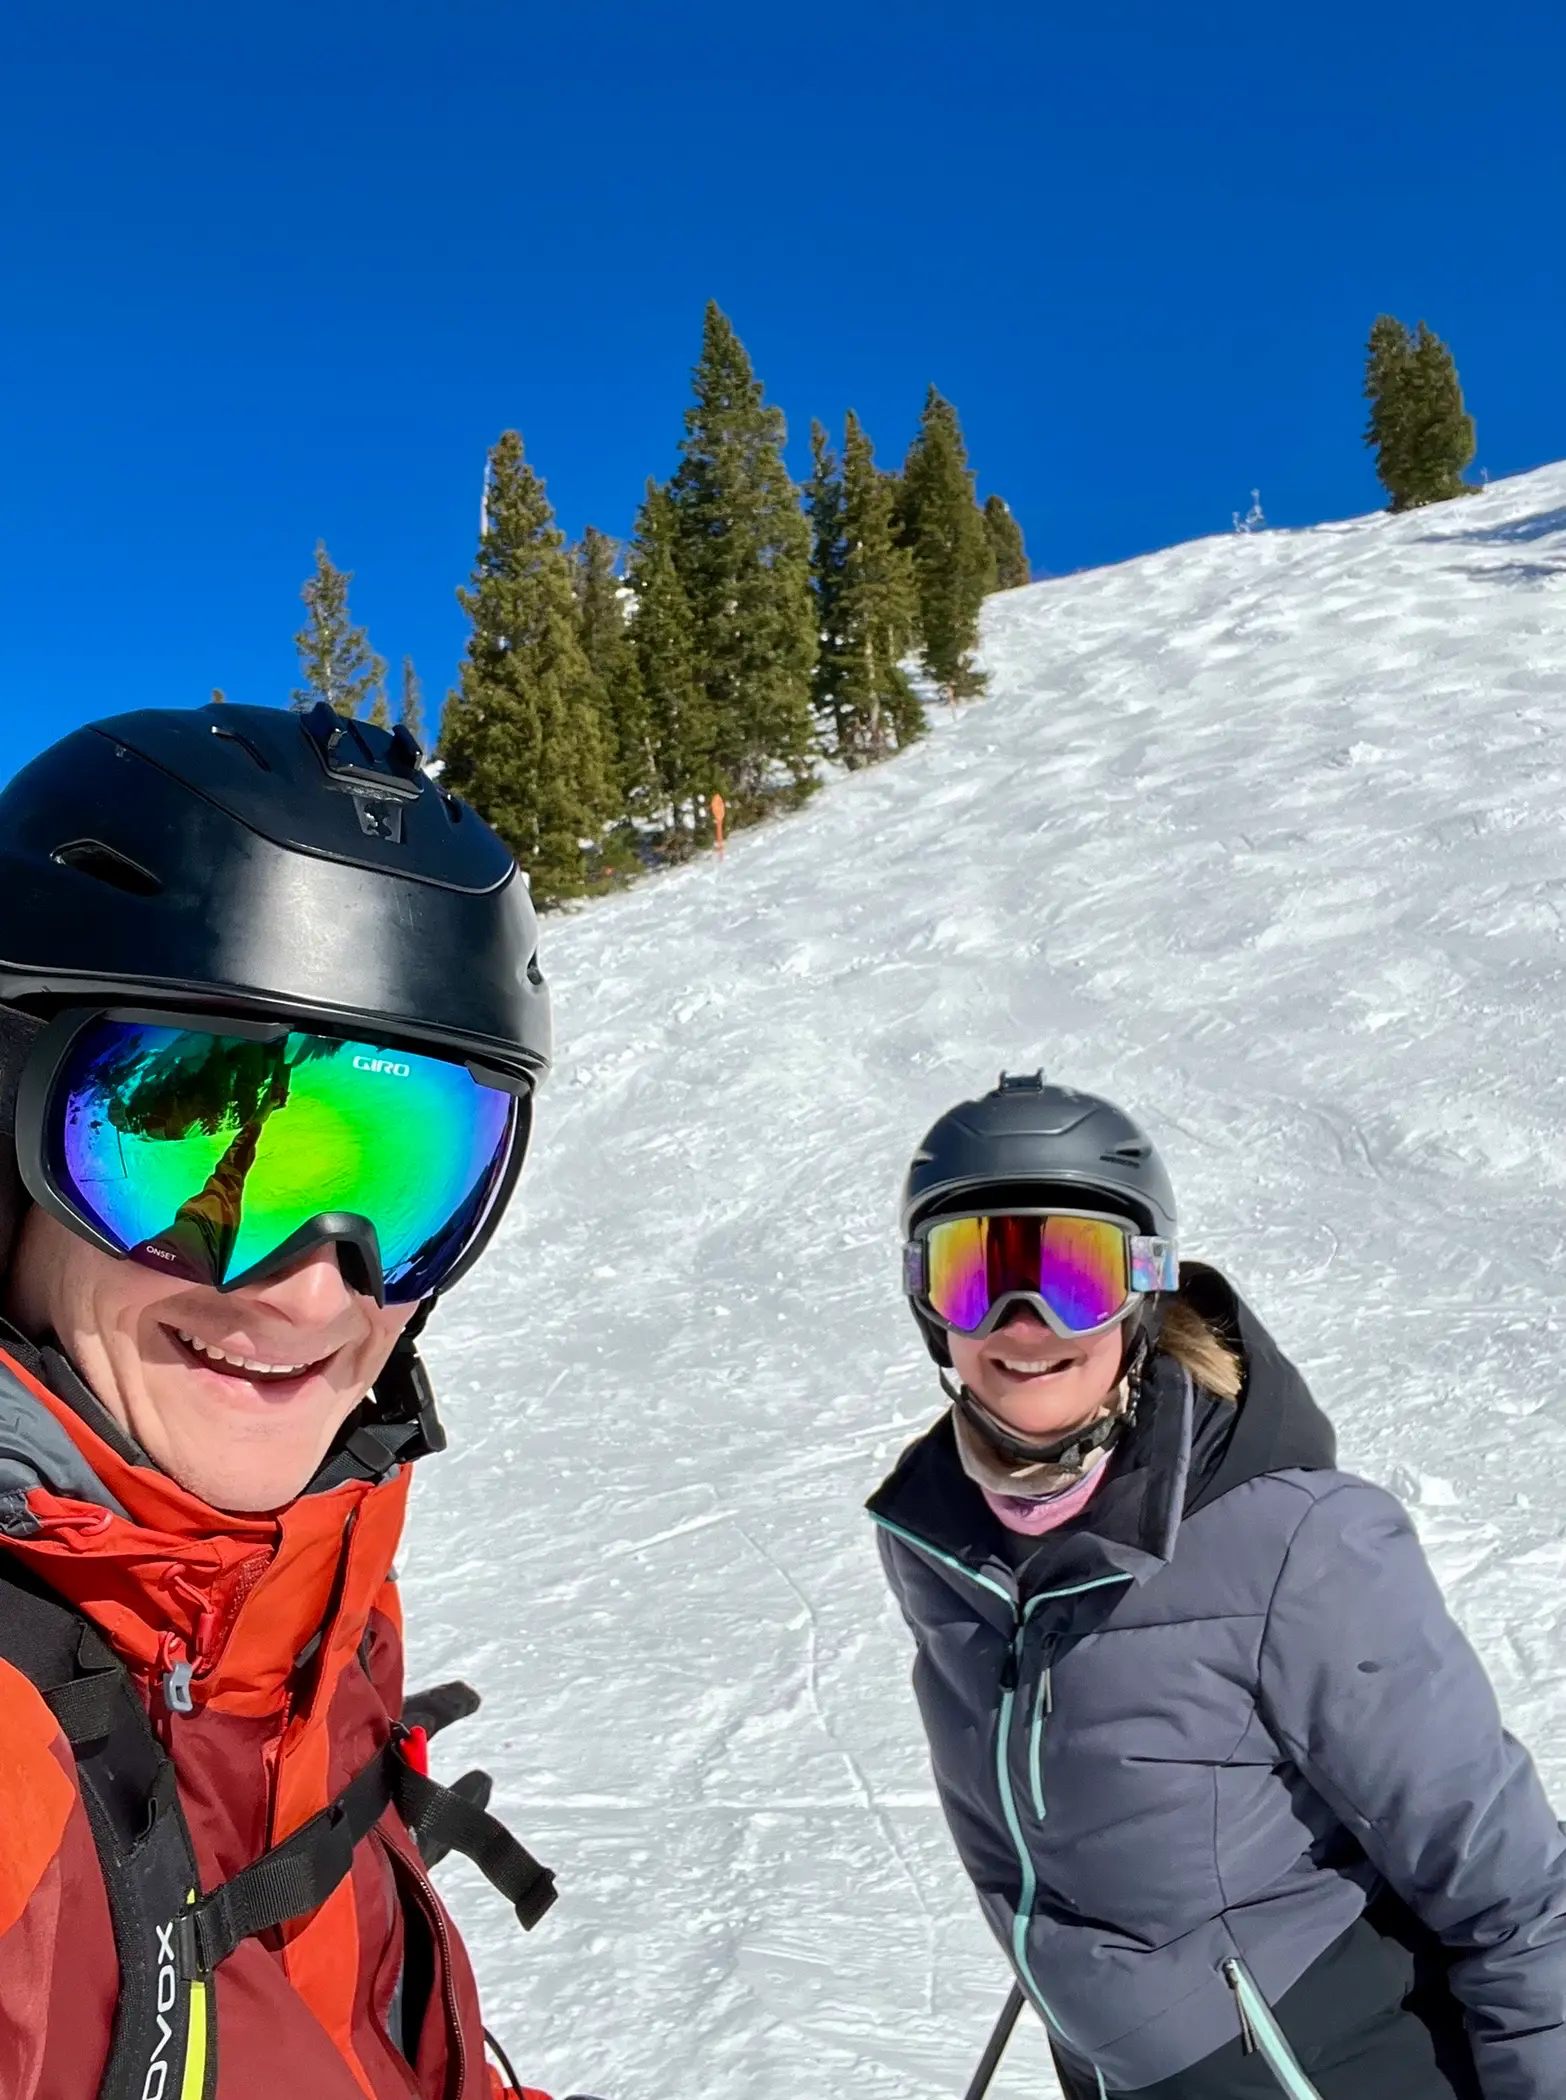 Lindsey and Keith are enjoying some early-season turns